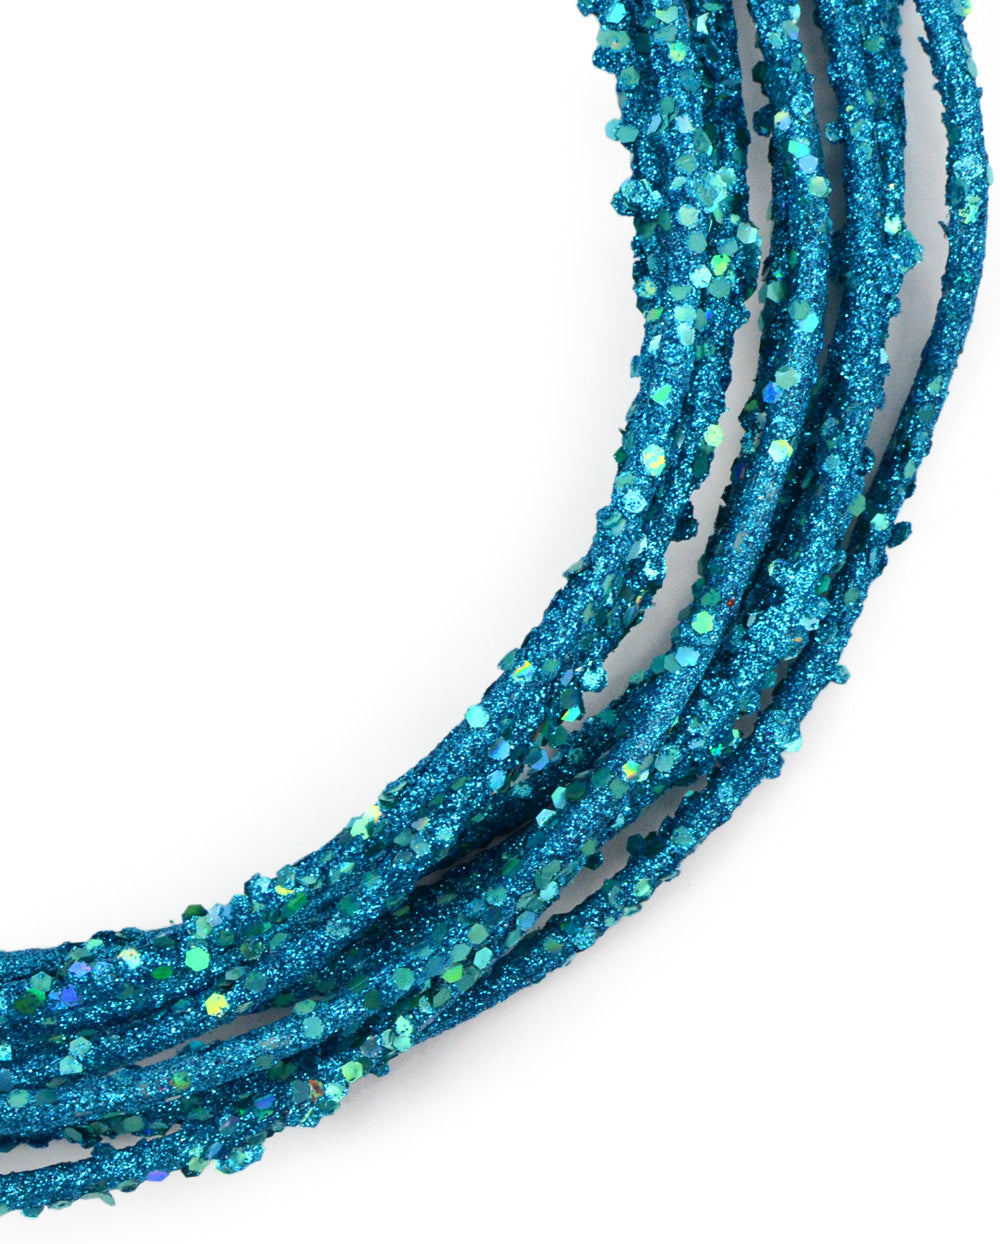 Wired Glamour Rope: Turquoise Blue (25 Feet)